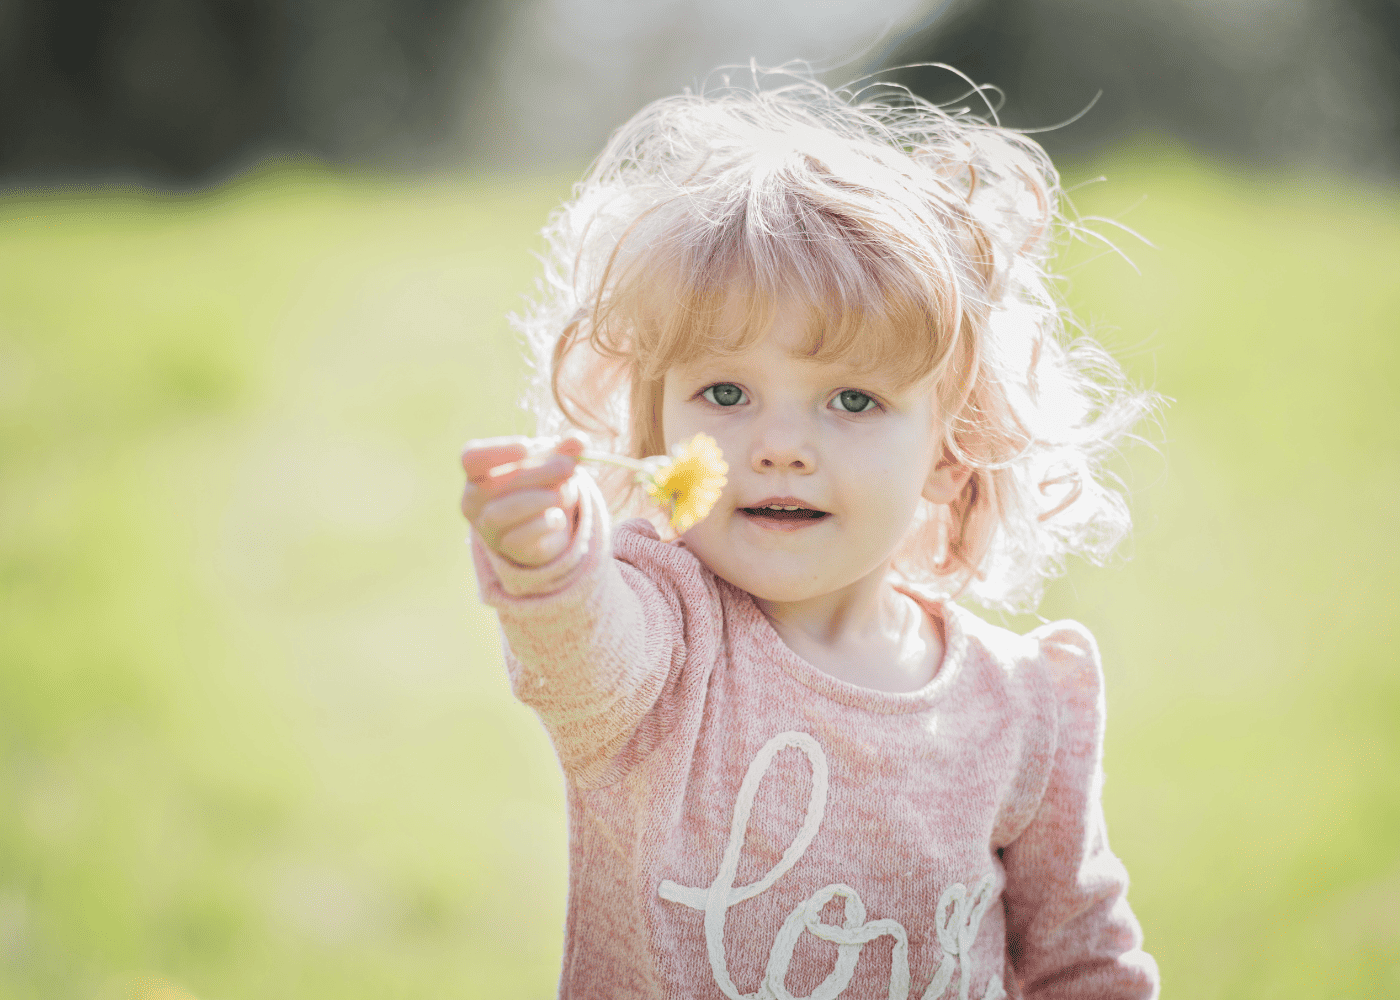 A toddler holding out a small yellow flower